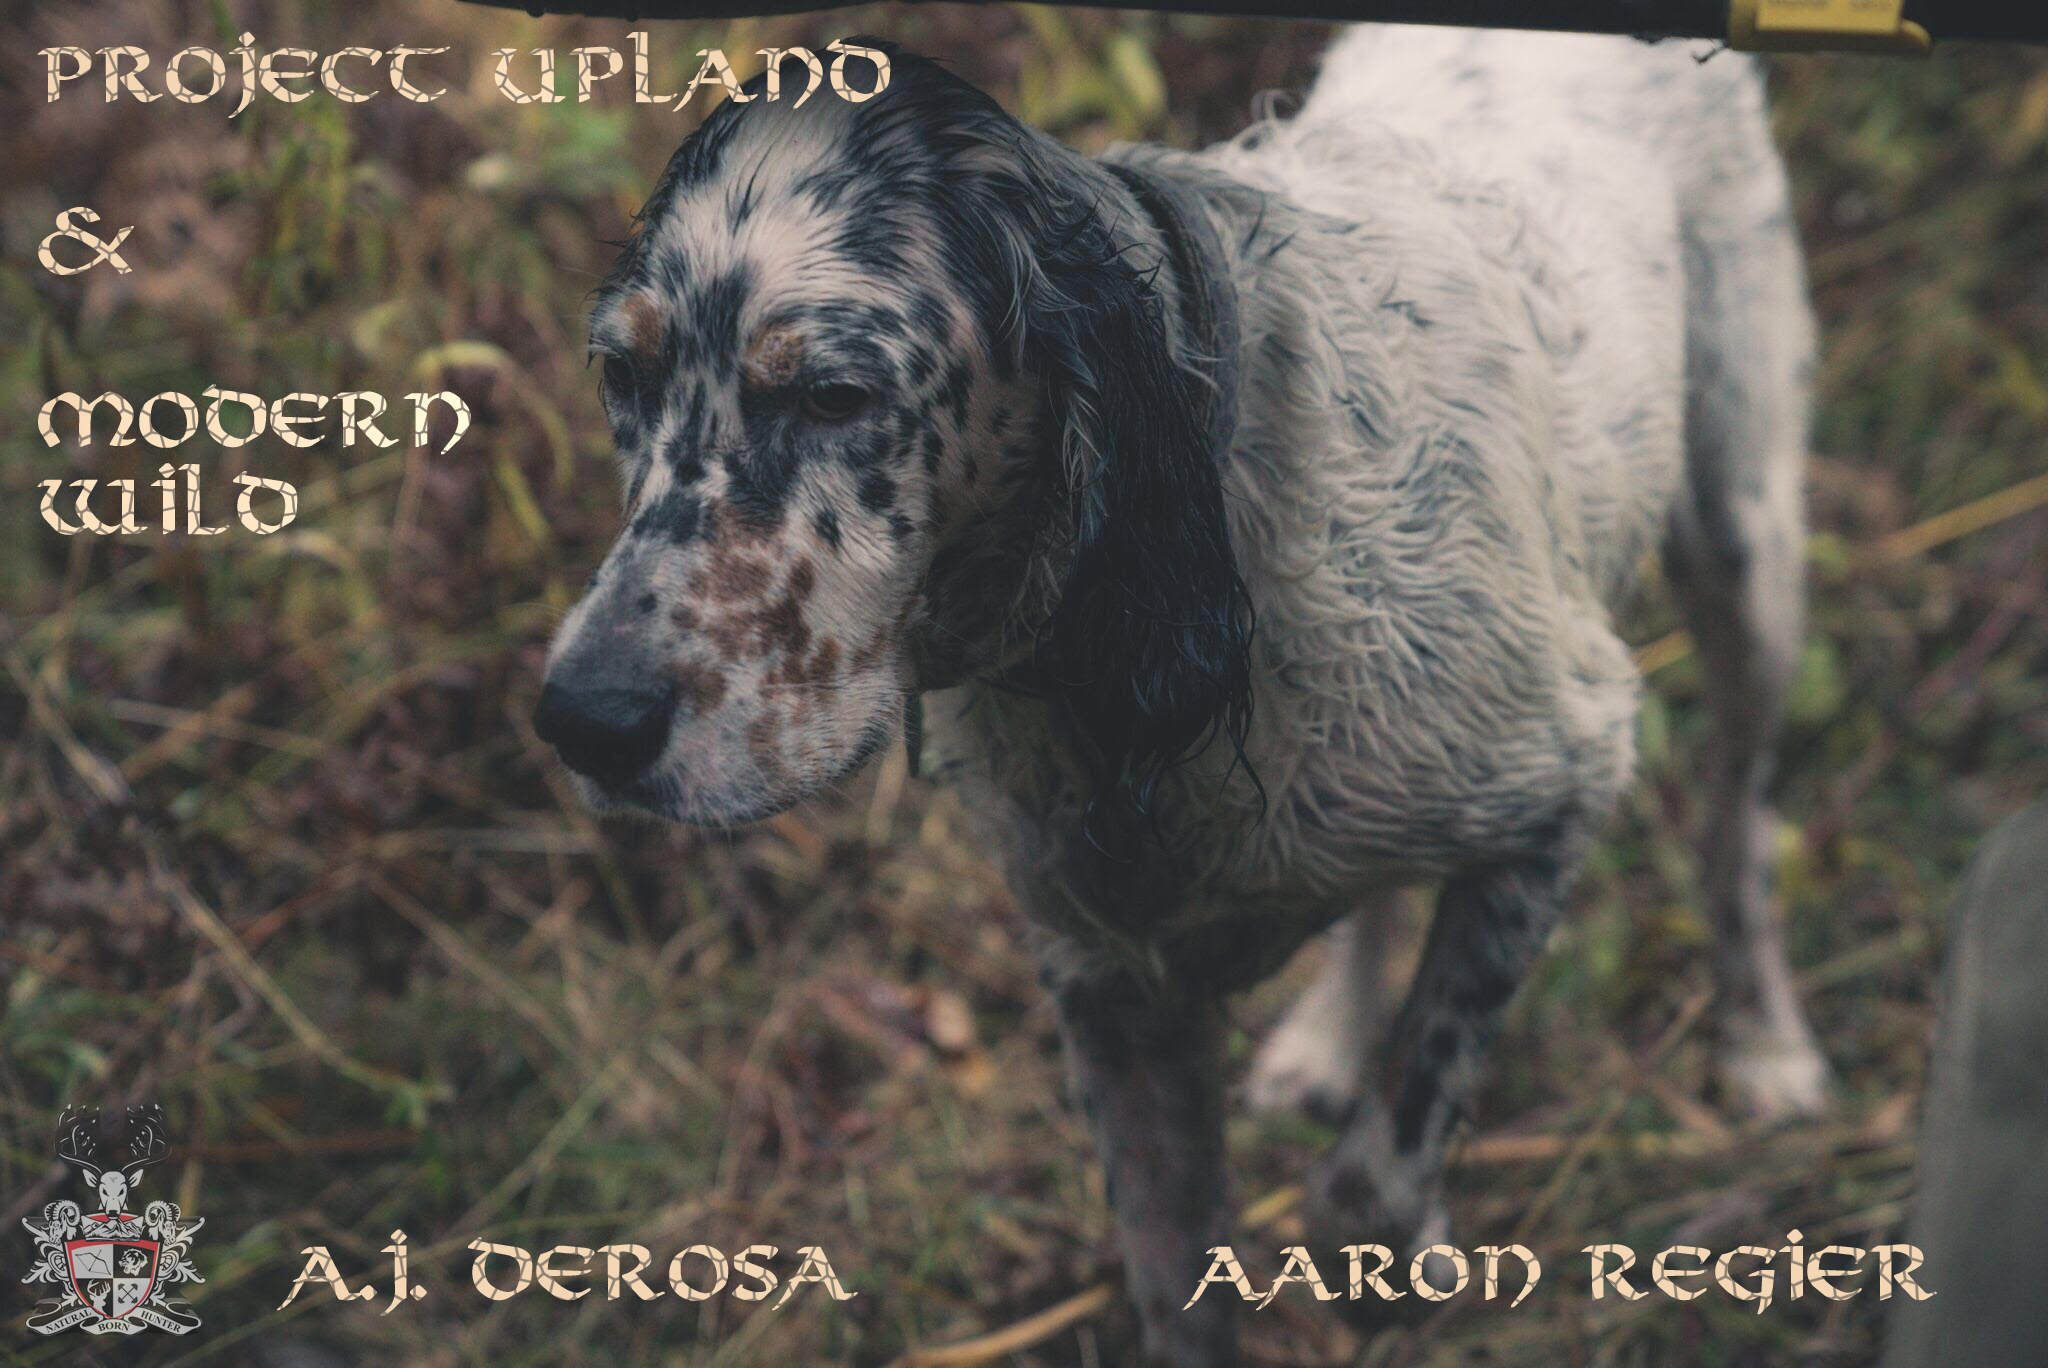 Aaron Regier of Modern Wild and A.J. DeRosa of Project Upland - Natural Born Hunter Podcast